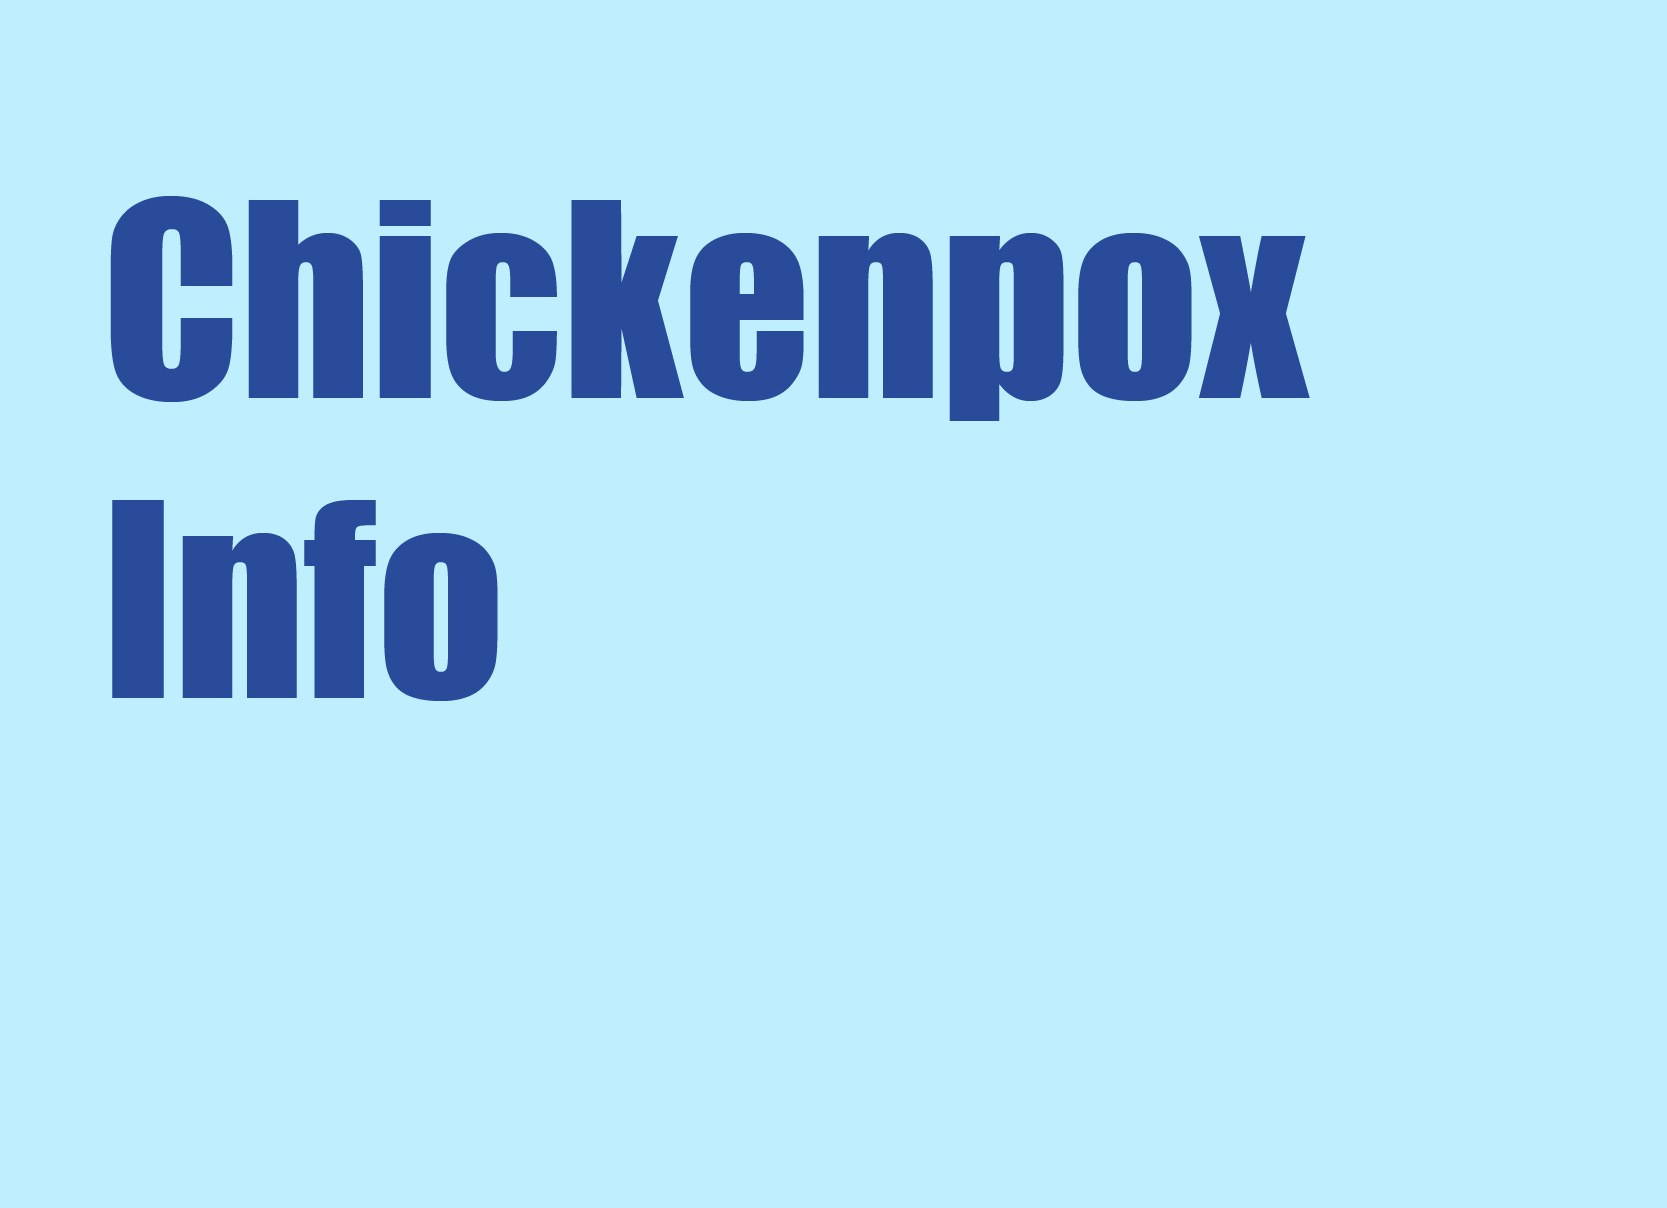 Chickenpox - Every thing you need to know!